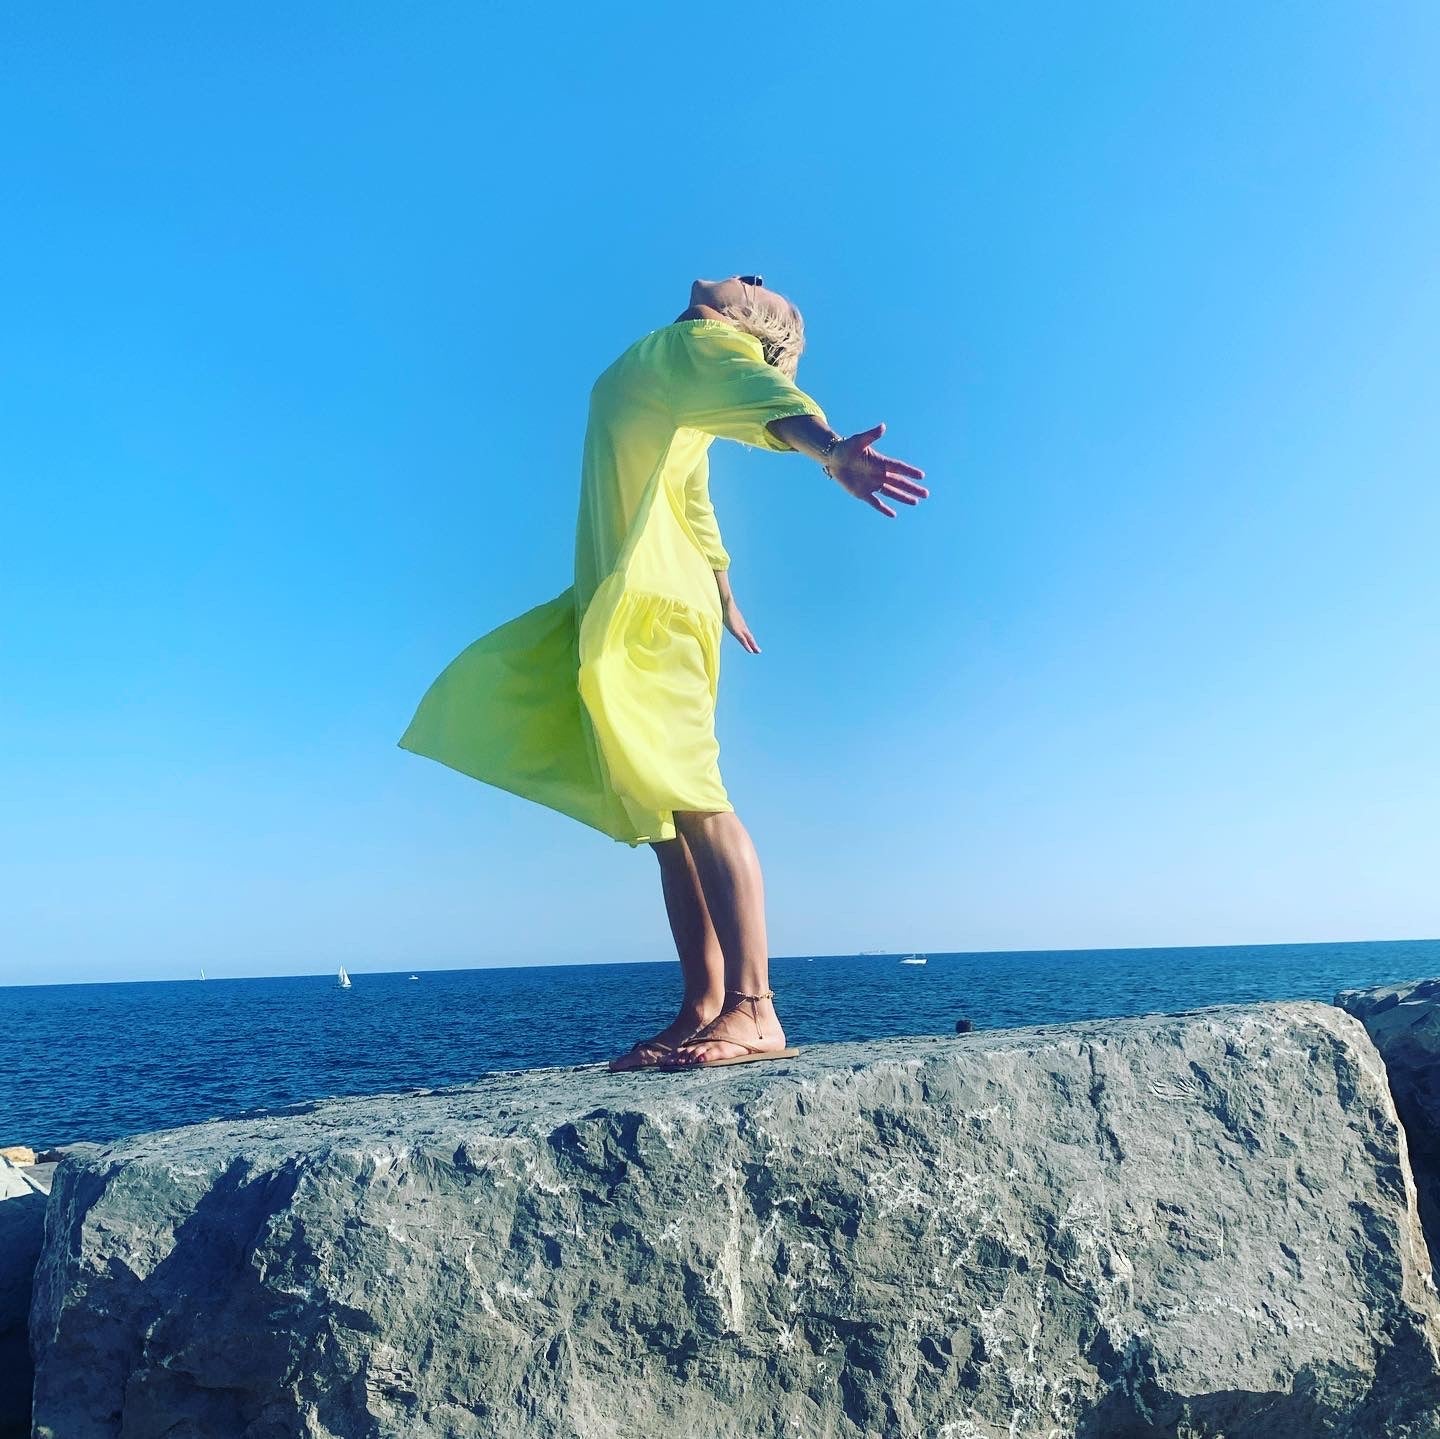 Woman standing on rock by sea in yellow dress reaching for the sky